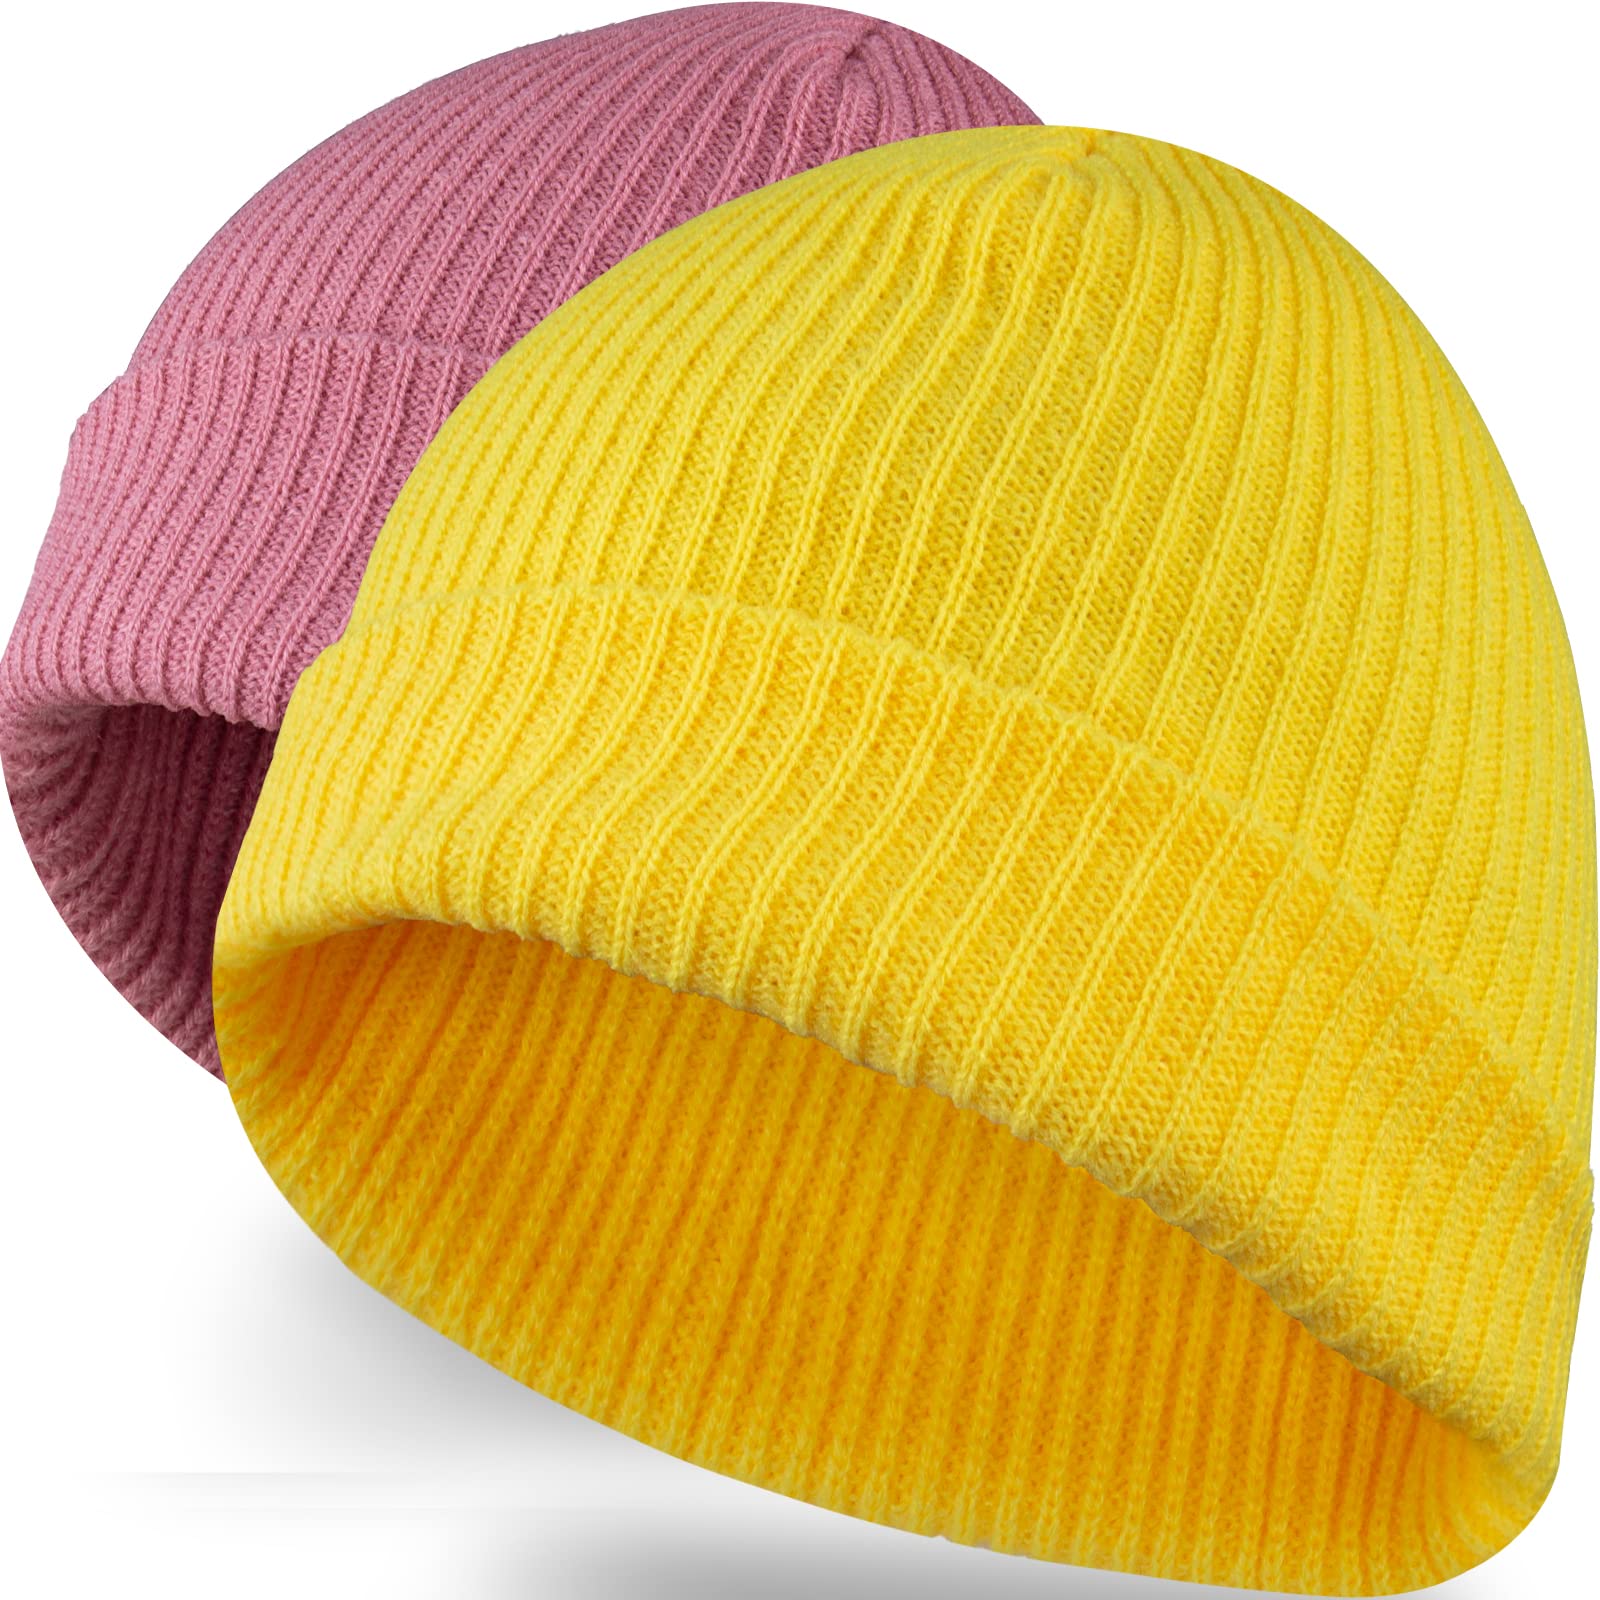 LAKIBOLE Pack Beanie Hats for Men Spring Summer Autumn Winter Slouchy Beanies for Women Teenage